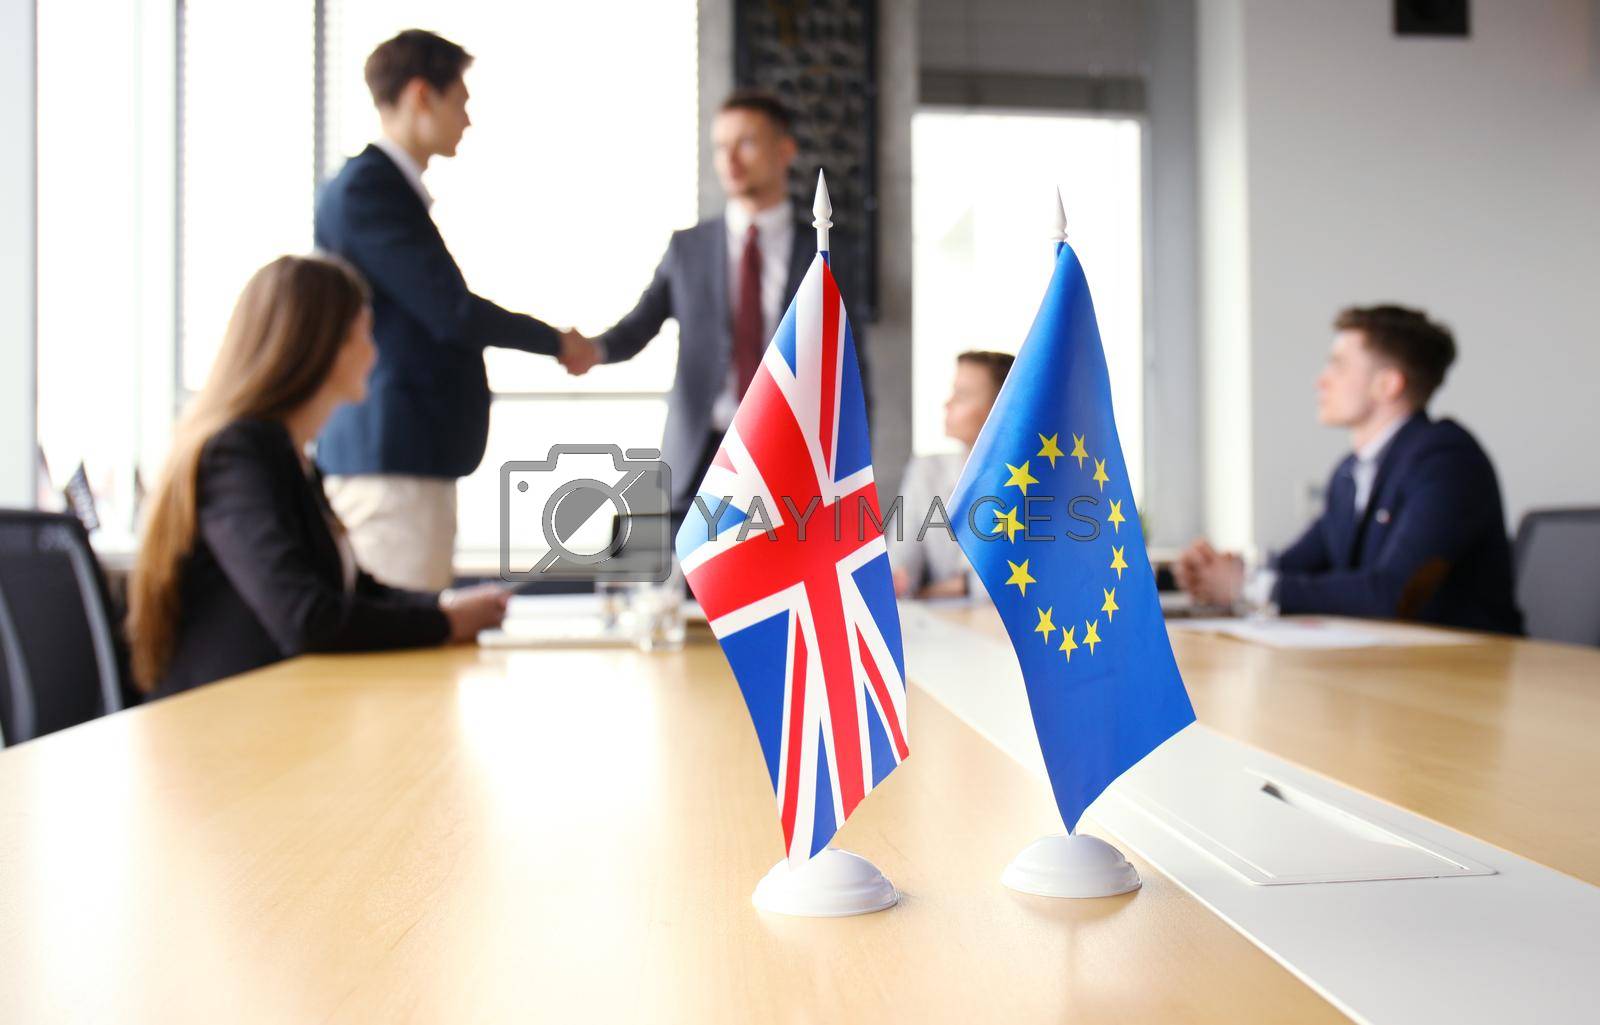 Royalty free image of European Union and United Kingdom leaders shaking hands on a deal agreement. by tsyhun